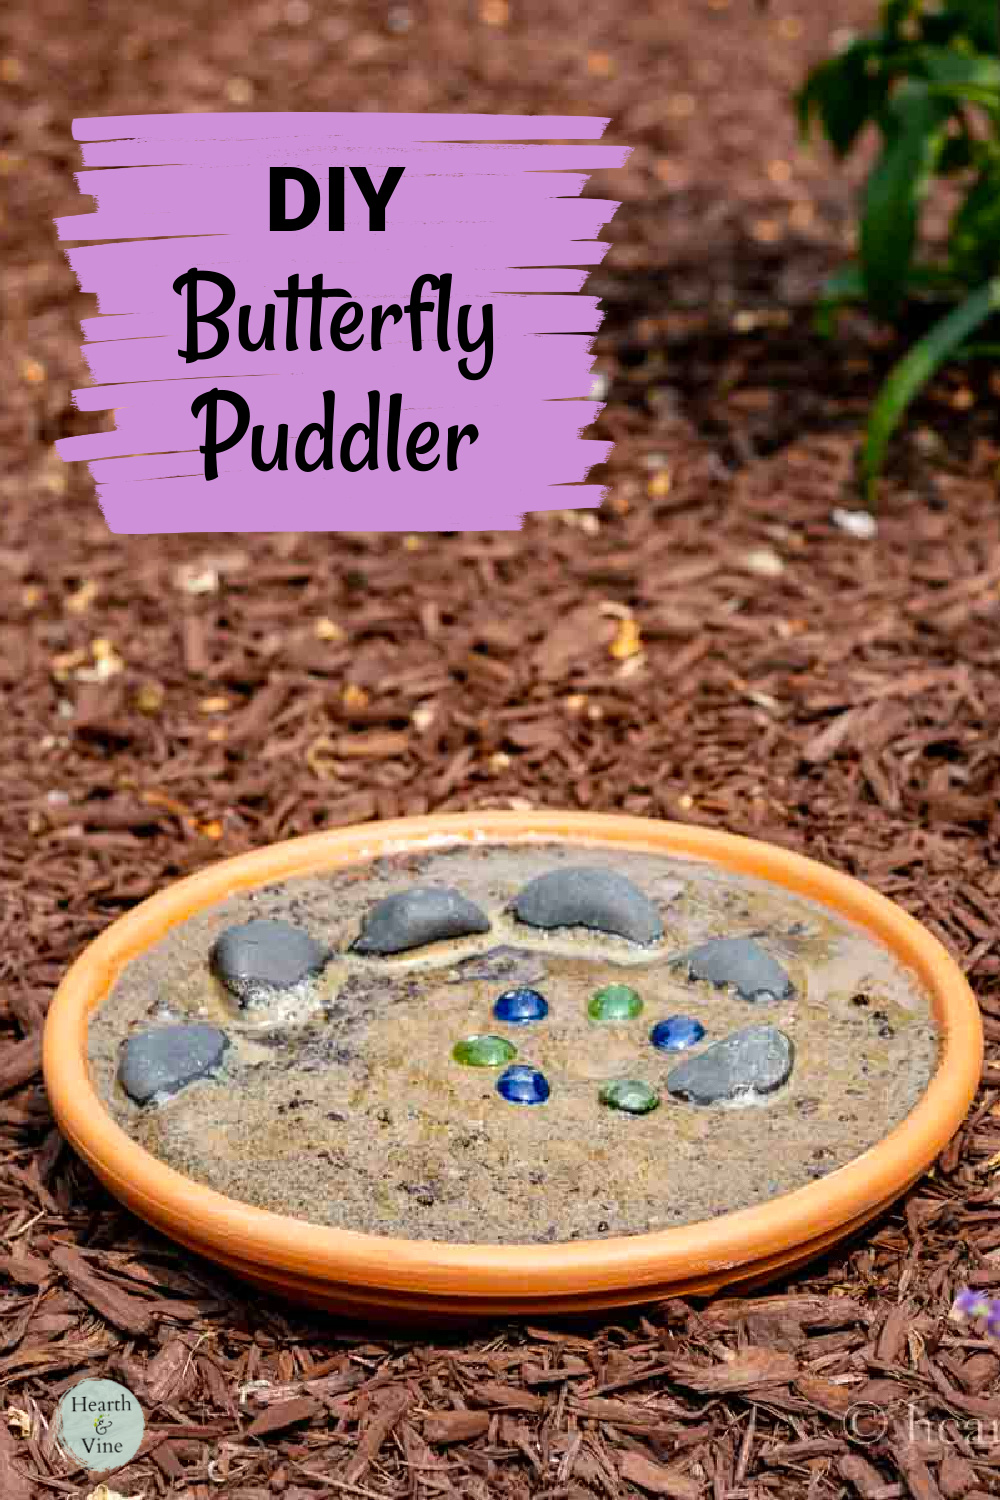 Large terracotta saucer filled with sand, water and stones to create a butterfly puddler.